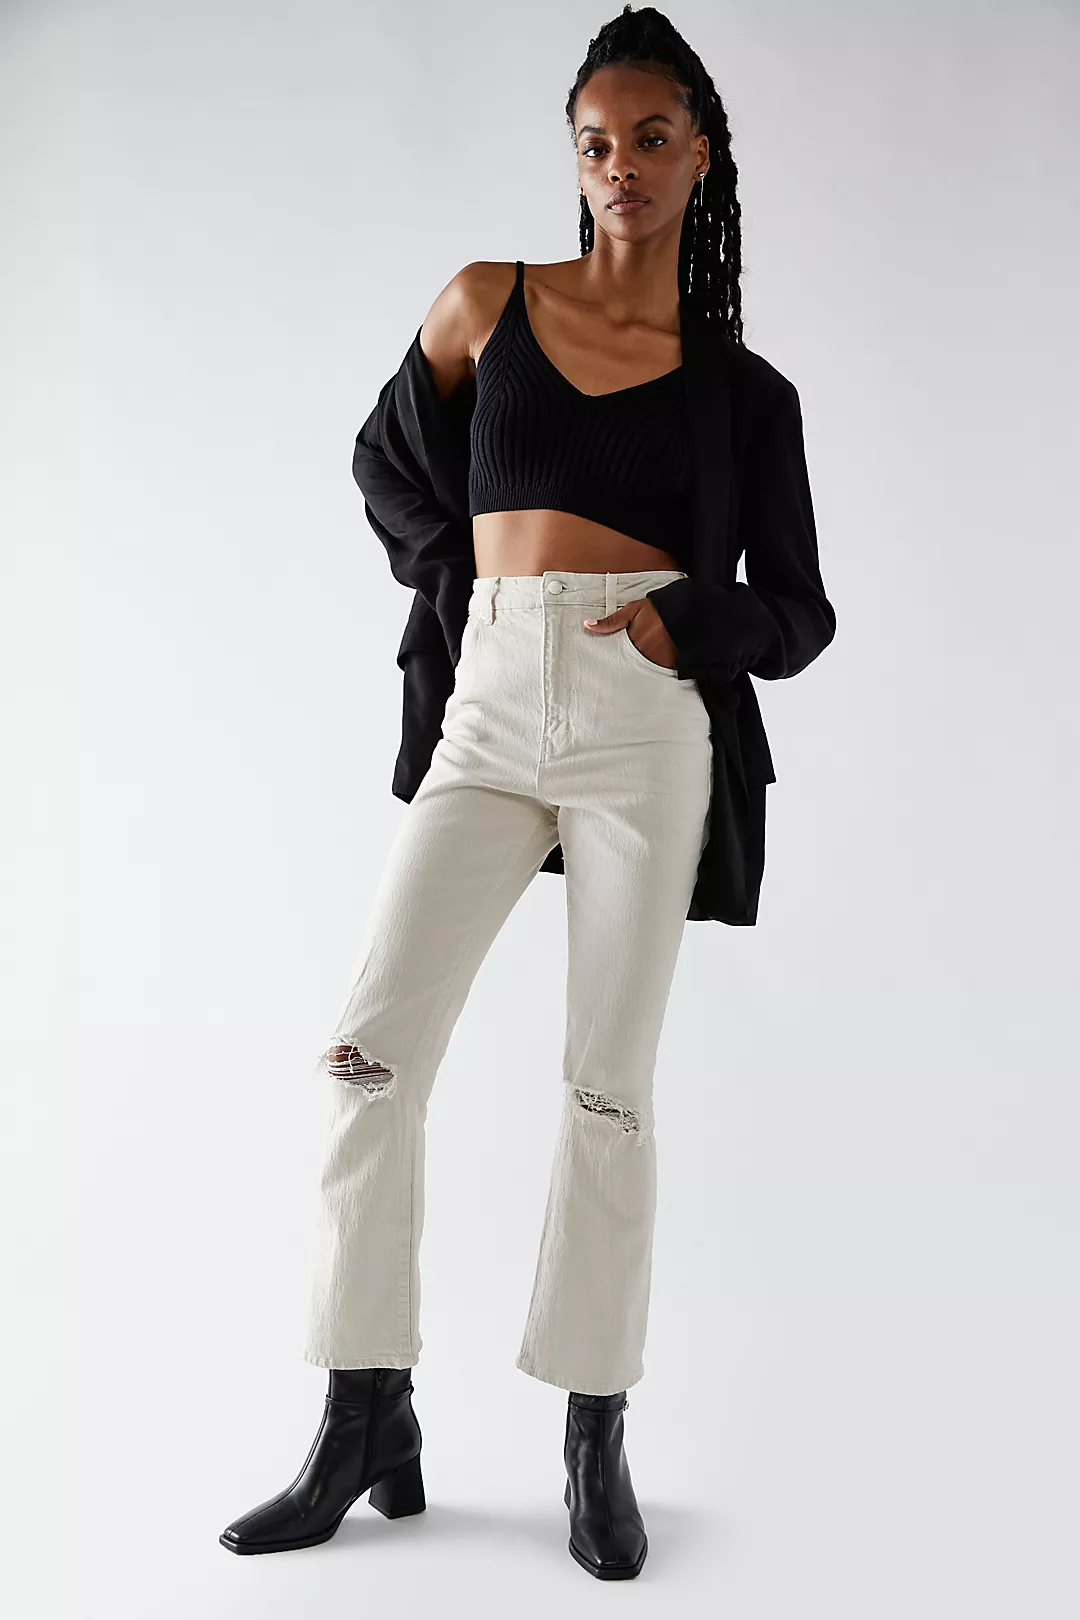 Freepeople Rolla's Dusters Crop Bootcut Jeans